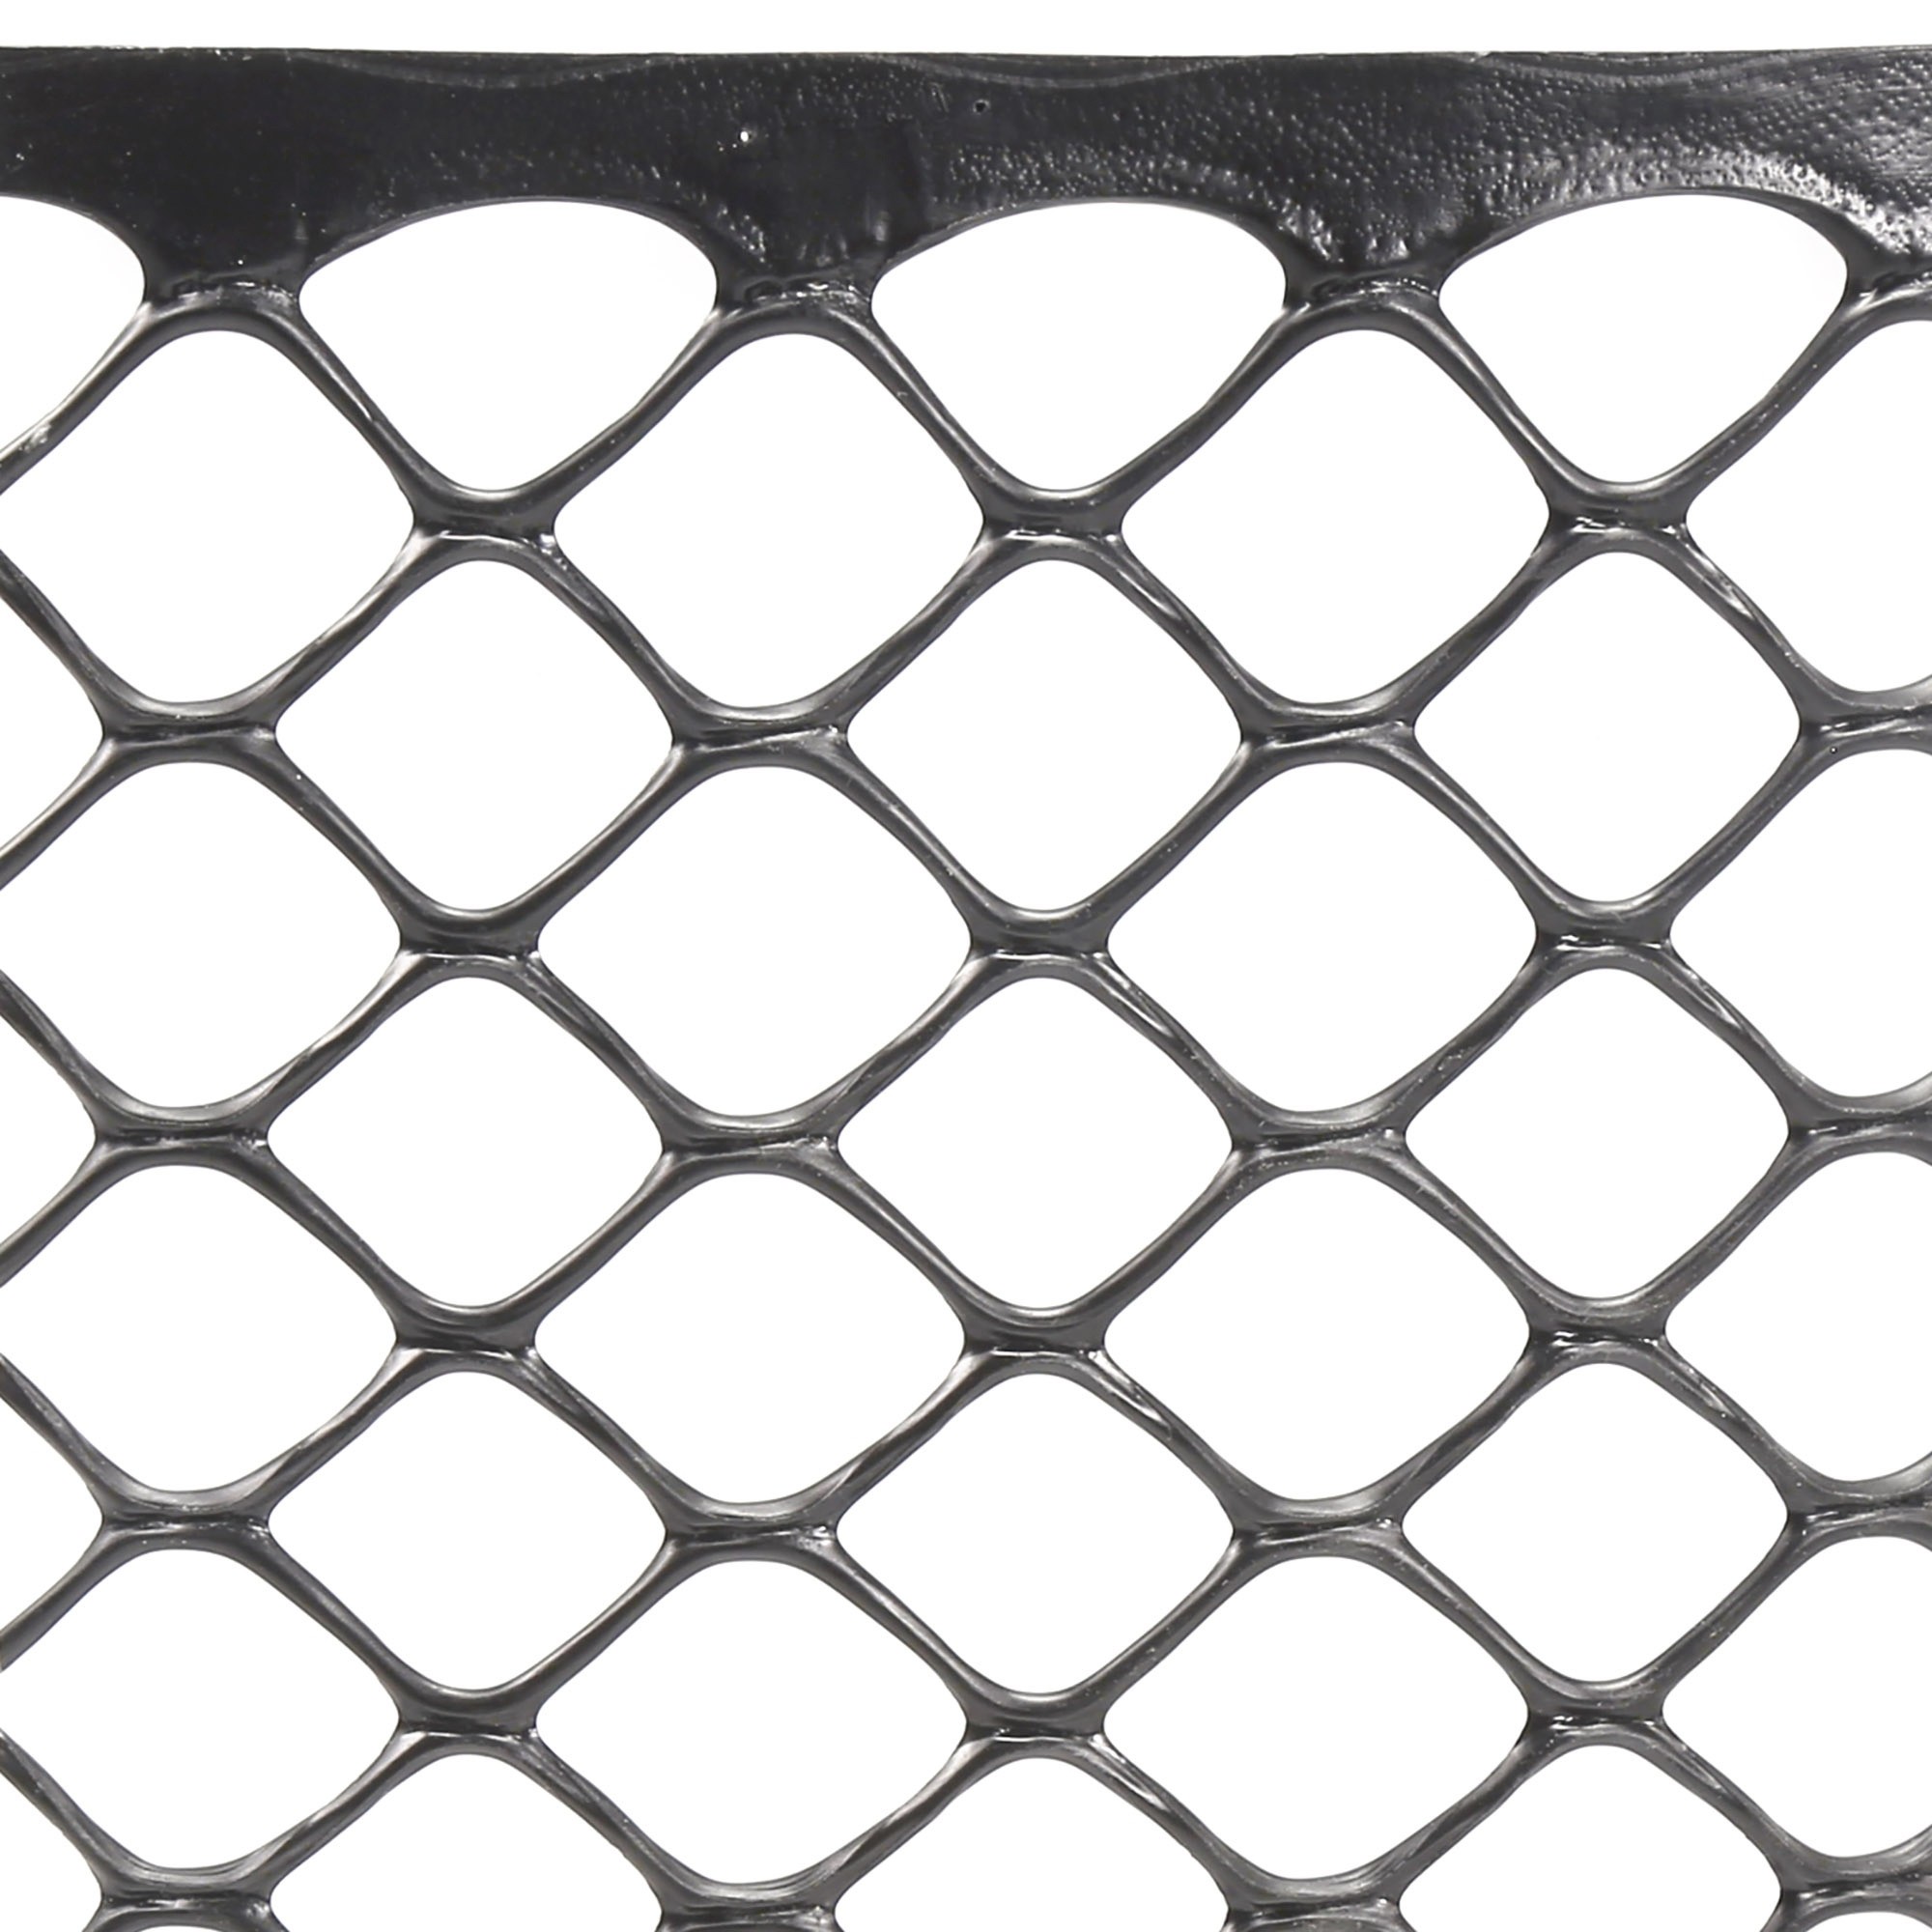 Tenax 3/4 In. x 2 Ft. H. x 25 Ft. L. Hexagonal Plastic Poultry Netting Fence,  Green - Bliffert Lumber and Hardware